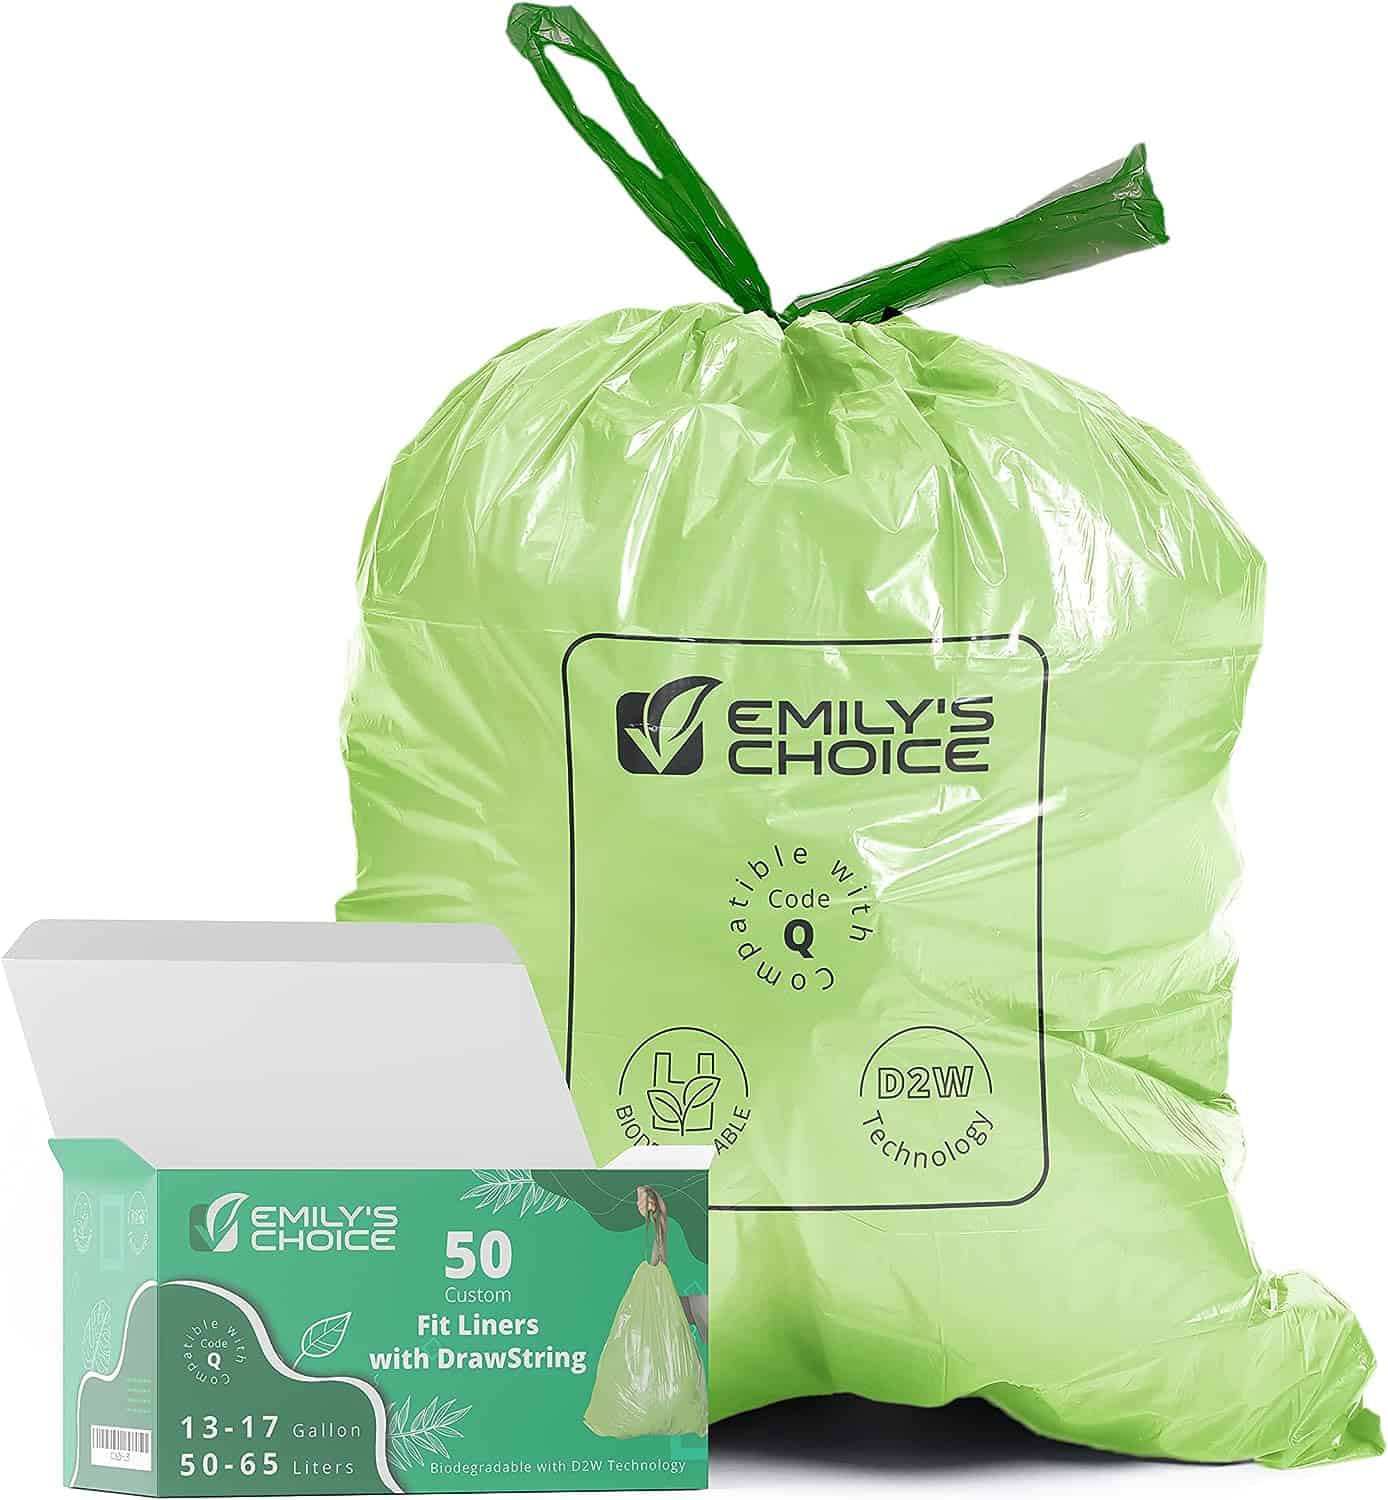 Emily’s Choice Heavy Duty Biodegradable Trash Bag Review